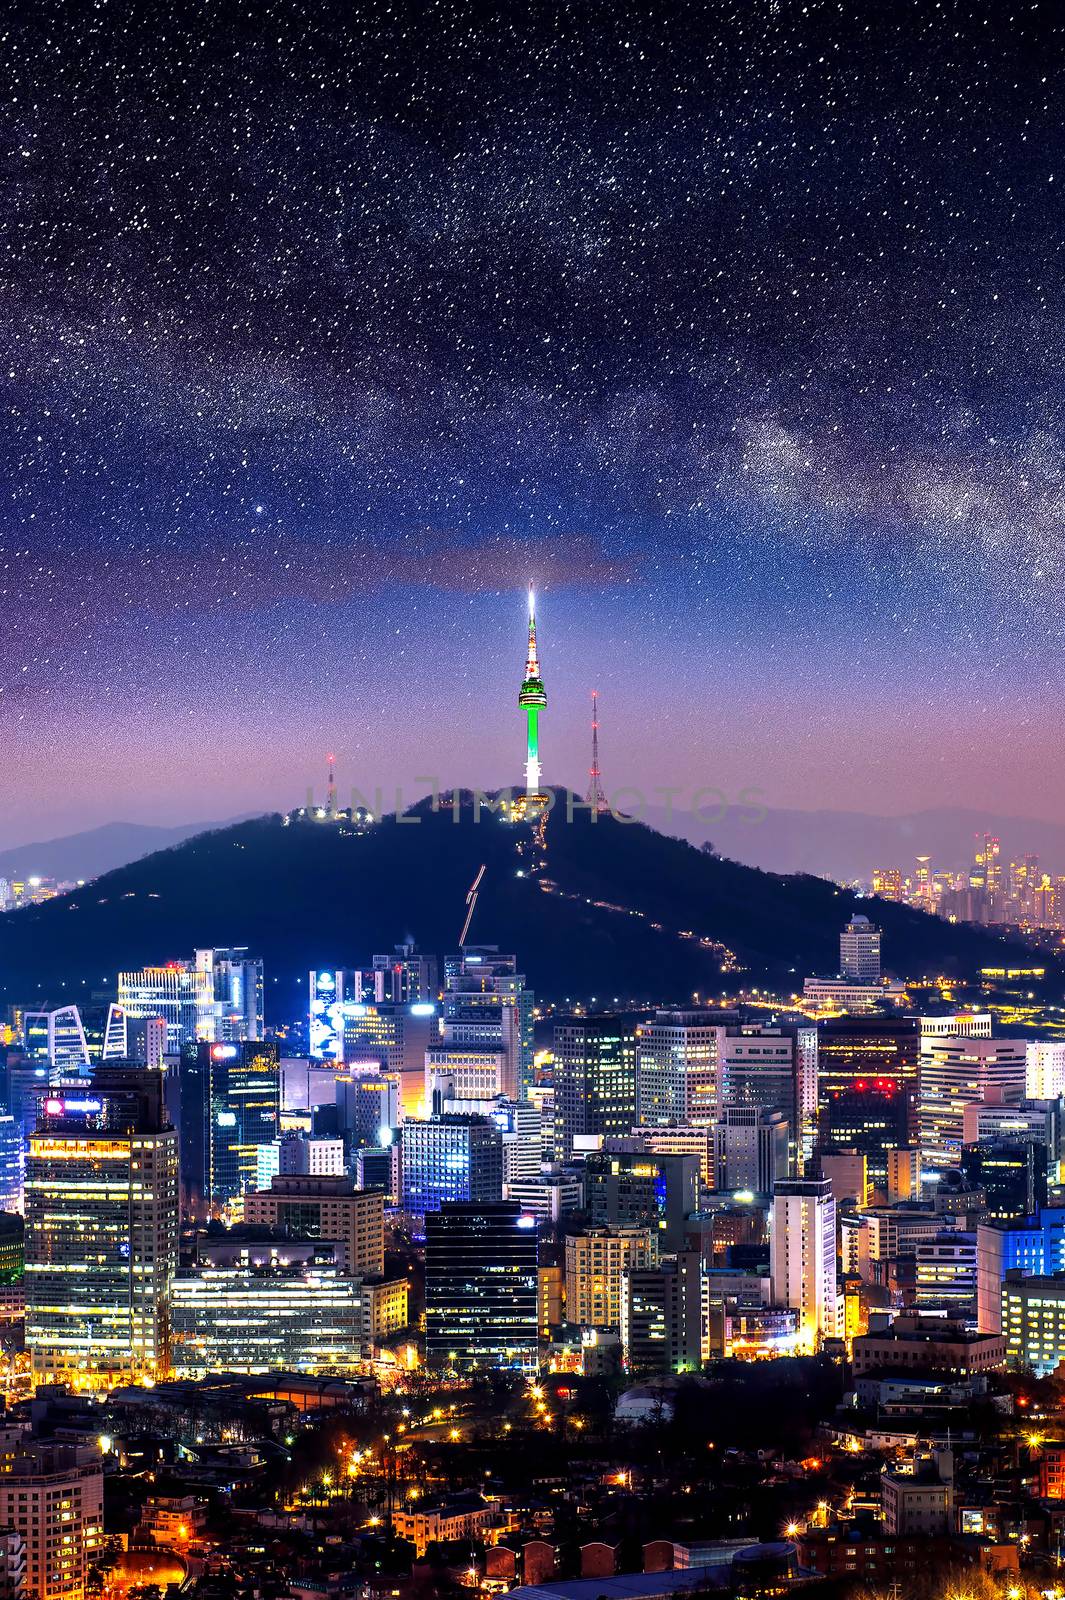 View of downtown cityscape and Seoul tower with Milky way in Seoul, South Korea.